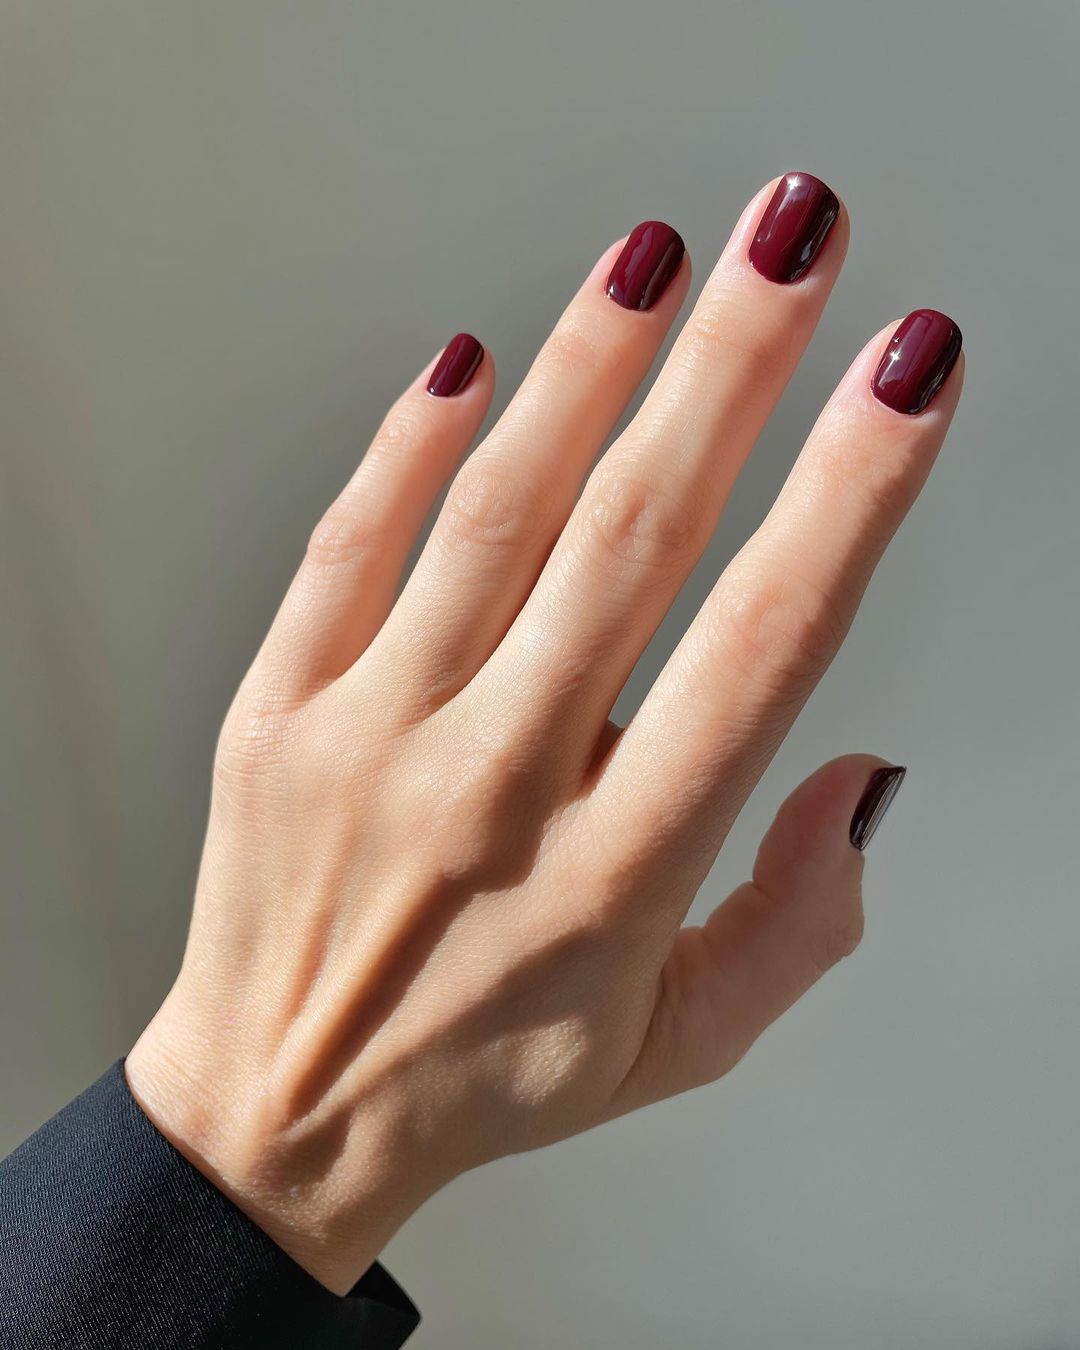 The 12 Best Base Coats For Nail Polish of 2023